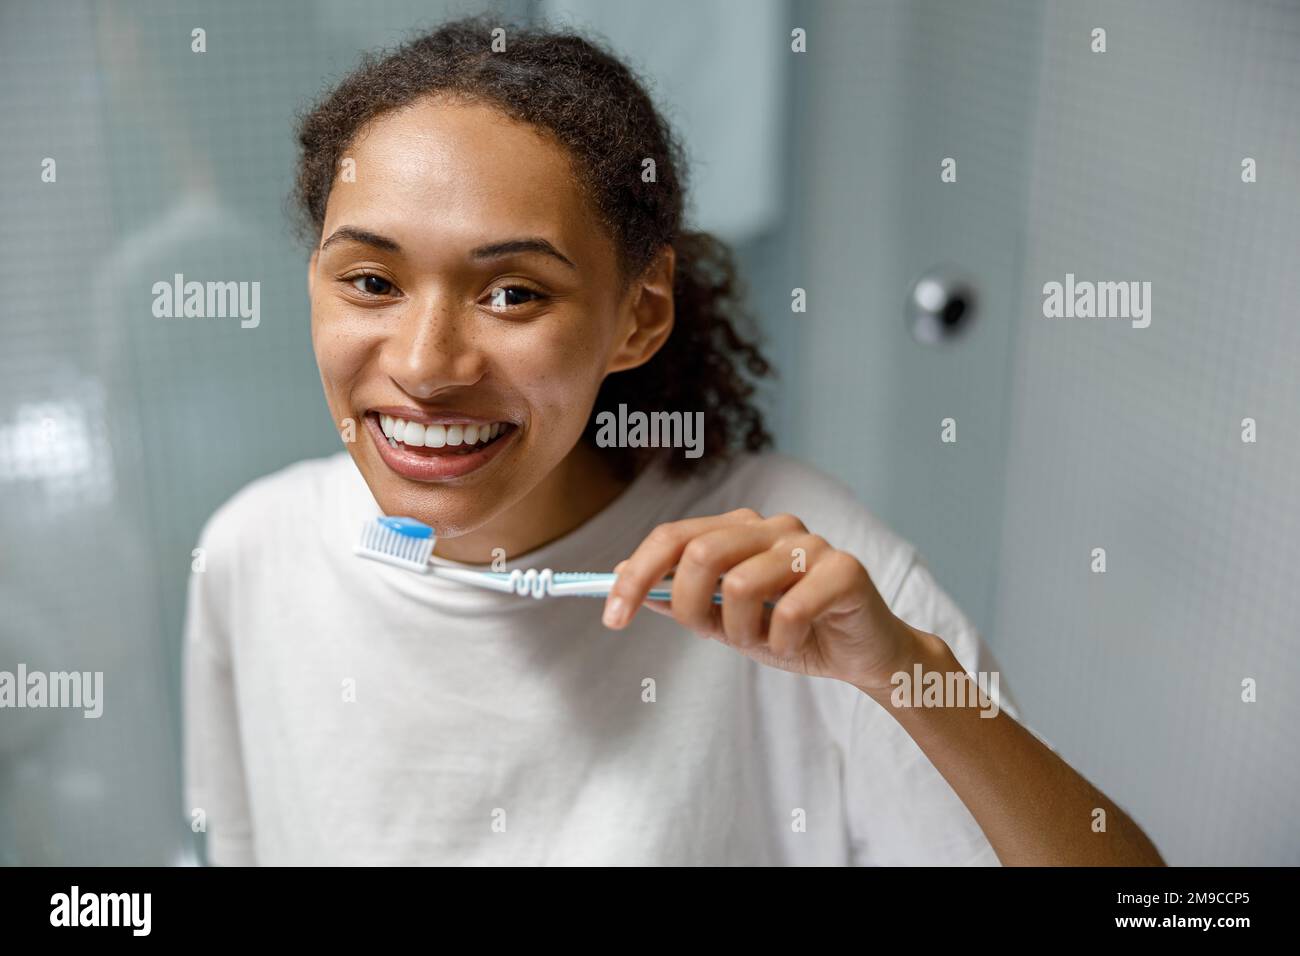 Smiling woman brushing teeth in bathroom and looking at camera. Morning routine beauty procedure Stock Photo